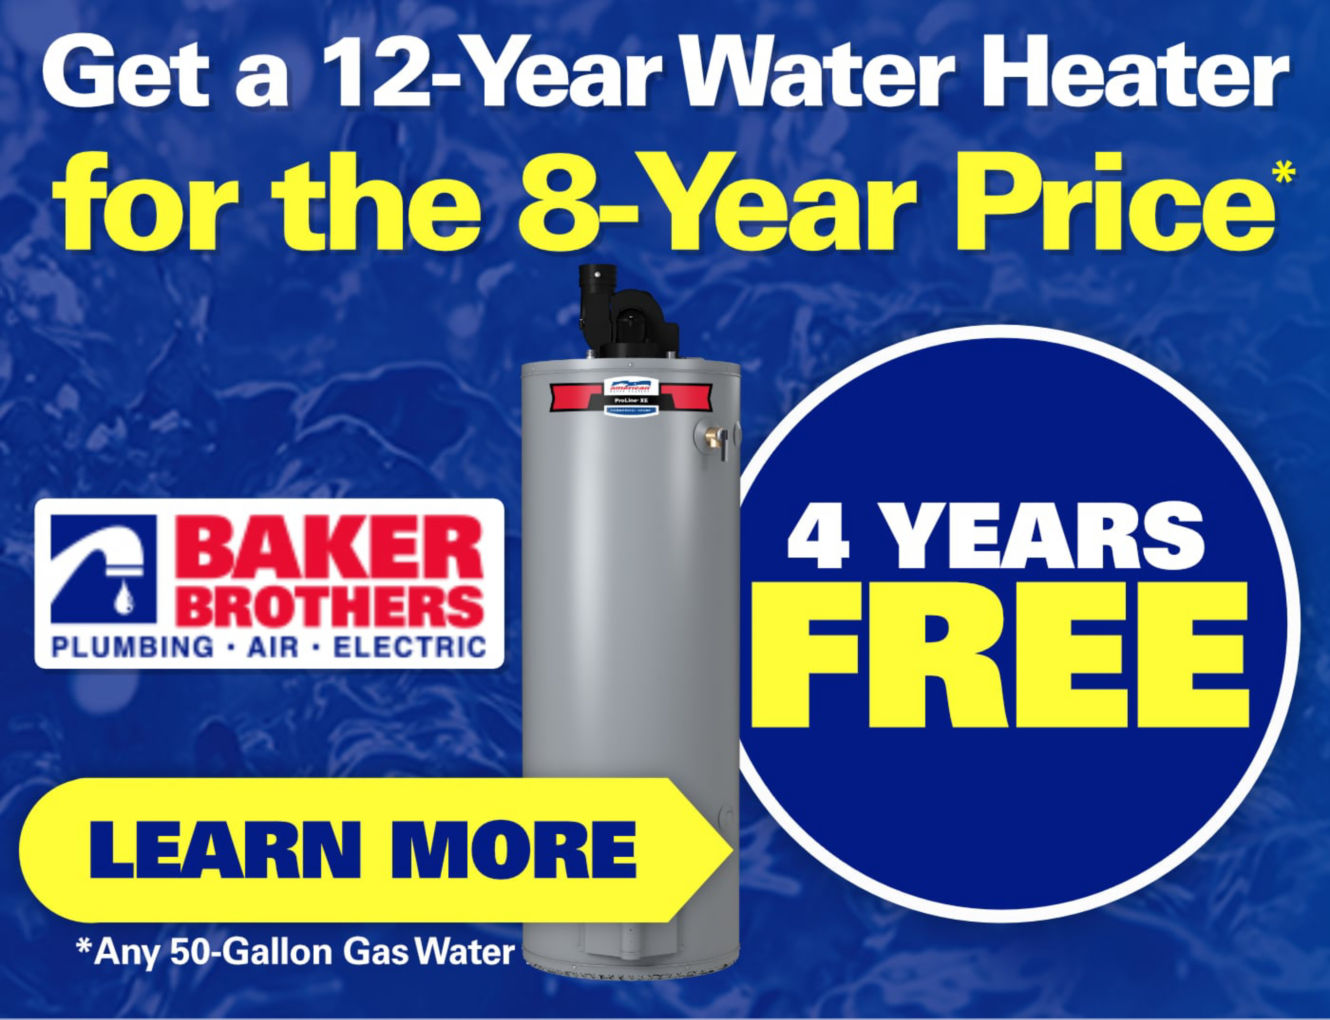 Water heaters - 12 year for 8 year price